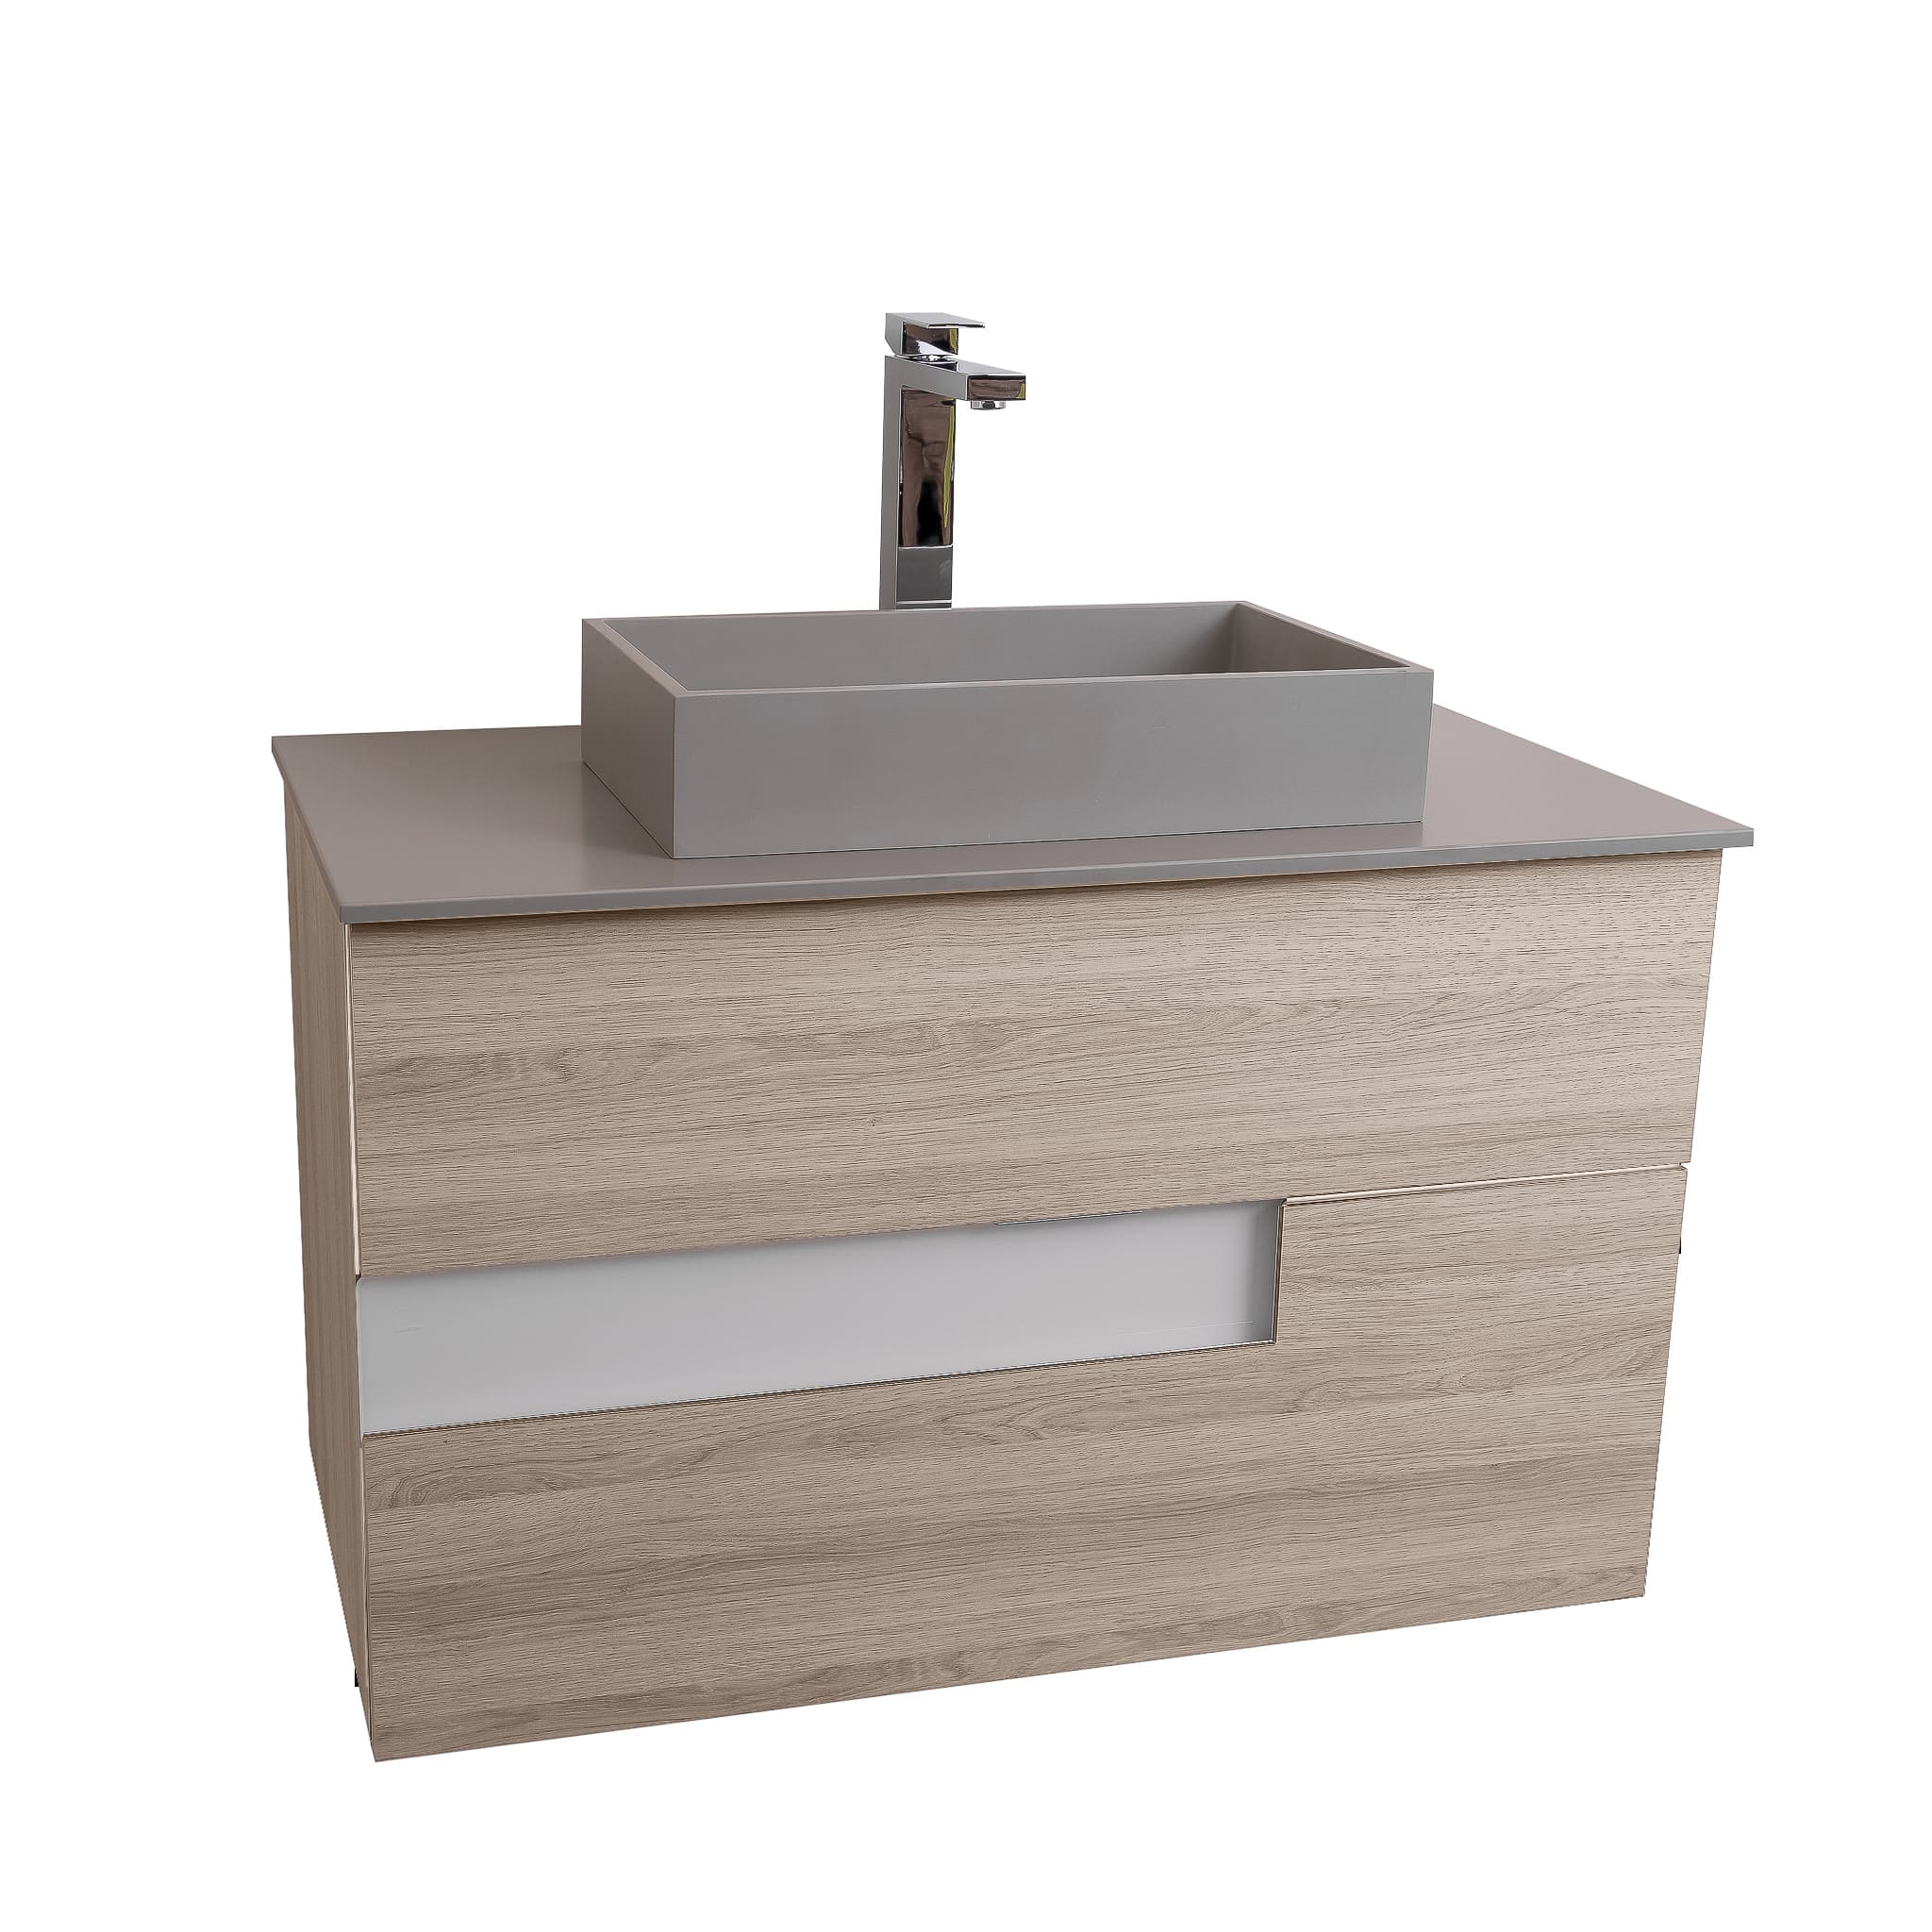 Vision 31.5 Natural Light Wood Cabinet, Solid Surface Flat Grey Counter And Infinity Square Solid Surface Grey Basin 1329, Wall Mounted Modern Vanity Set